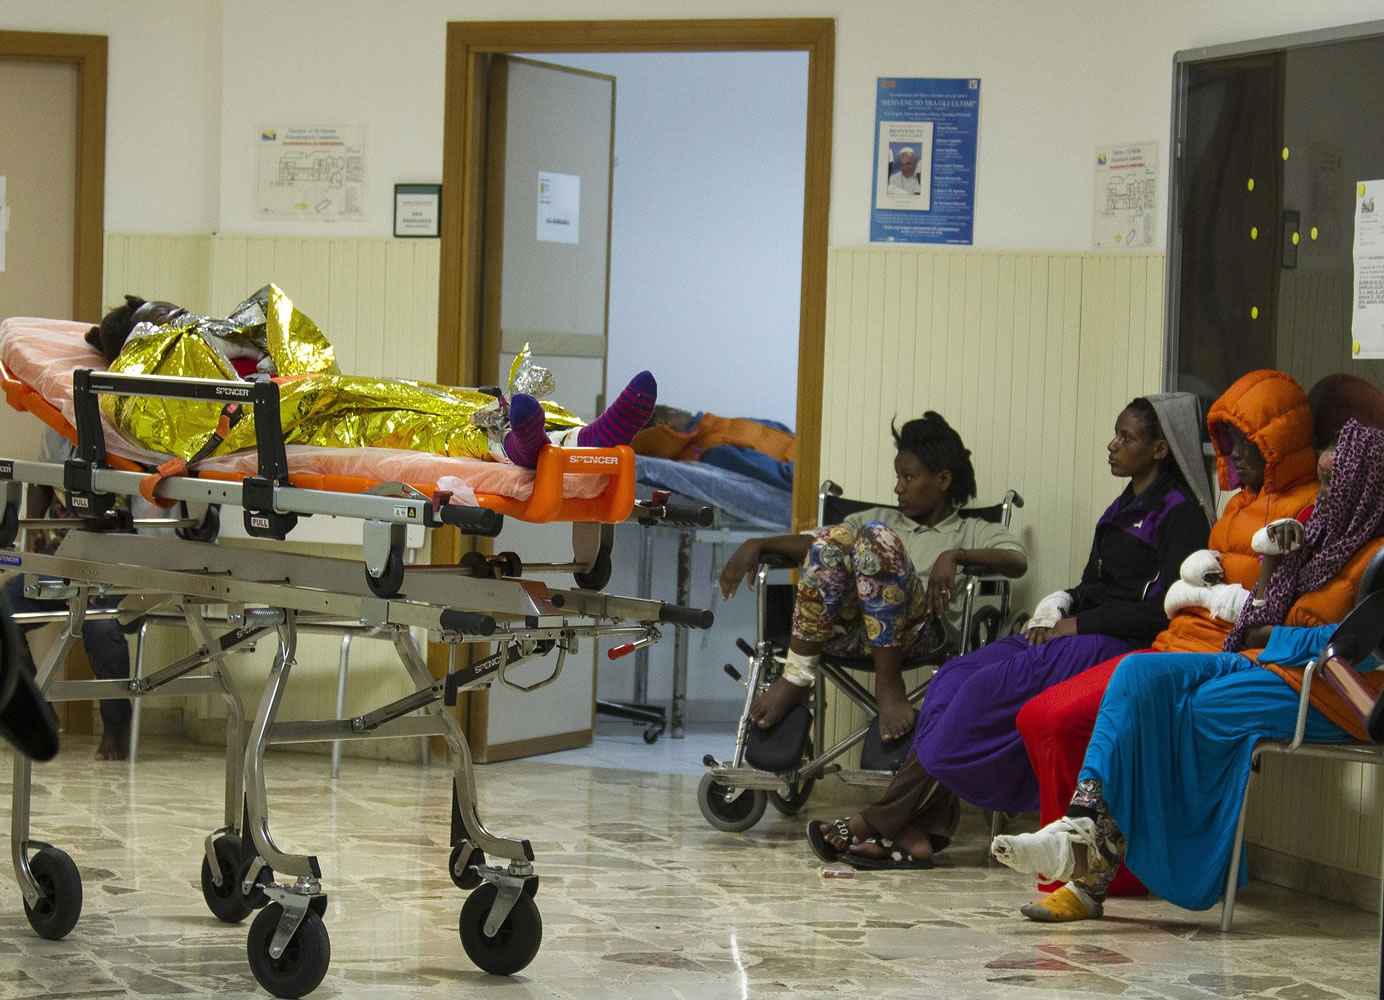 Injured women wait to be treated Friday in the hospital of Lampedusa Island, southern Italy. According to rescuers the women were injured in the explosion of a gas cylinder before leaving for Italy. An unprecedented wave of migrants has headed for the European Union's promised shores over the past week, with 10,000 people making the trip.